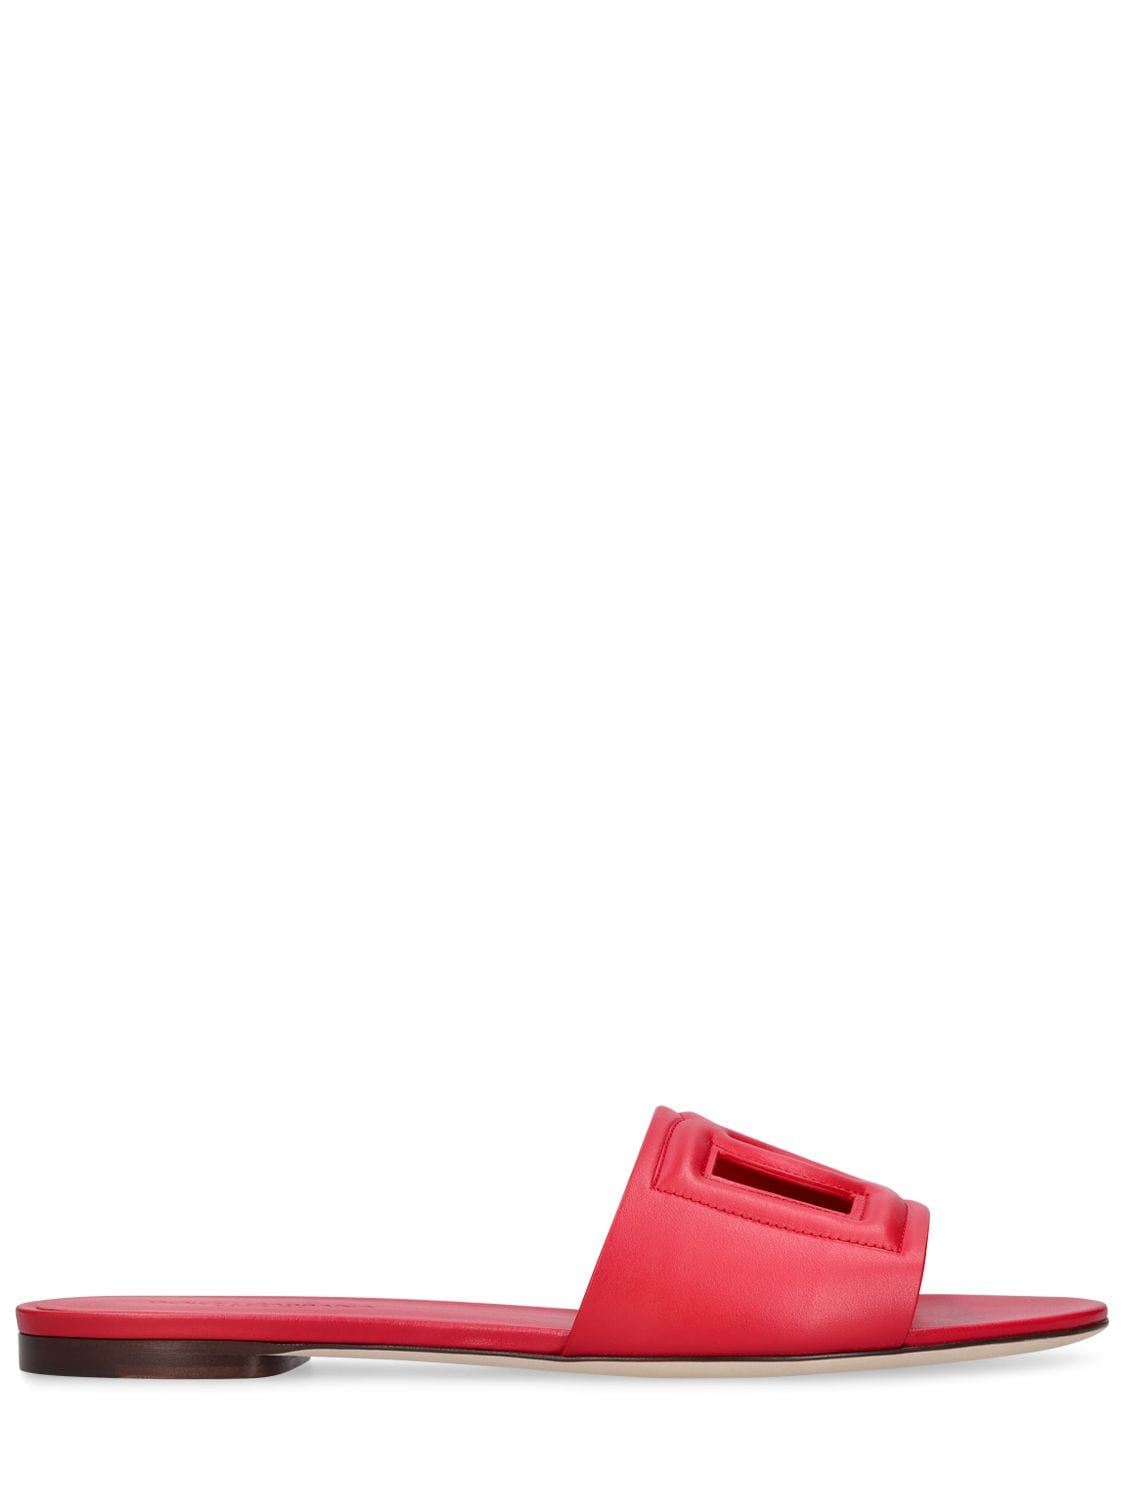 Dolce & Gabbana 10mm Bianca Leather Slide Sandals In Red